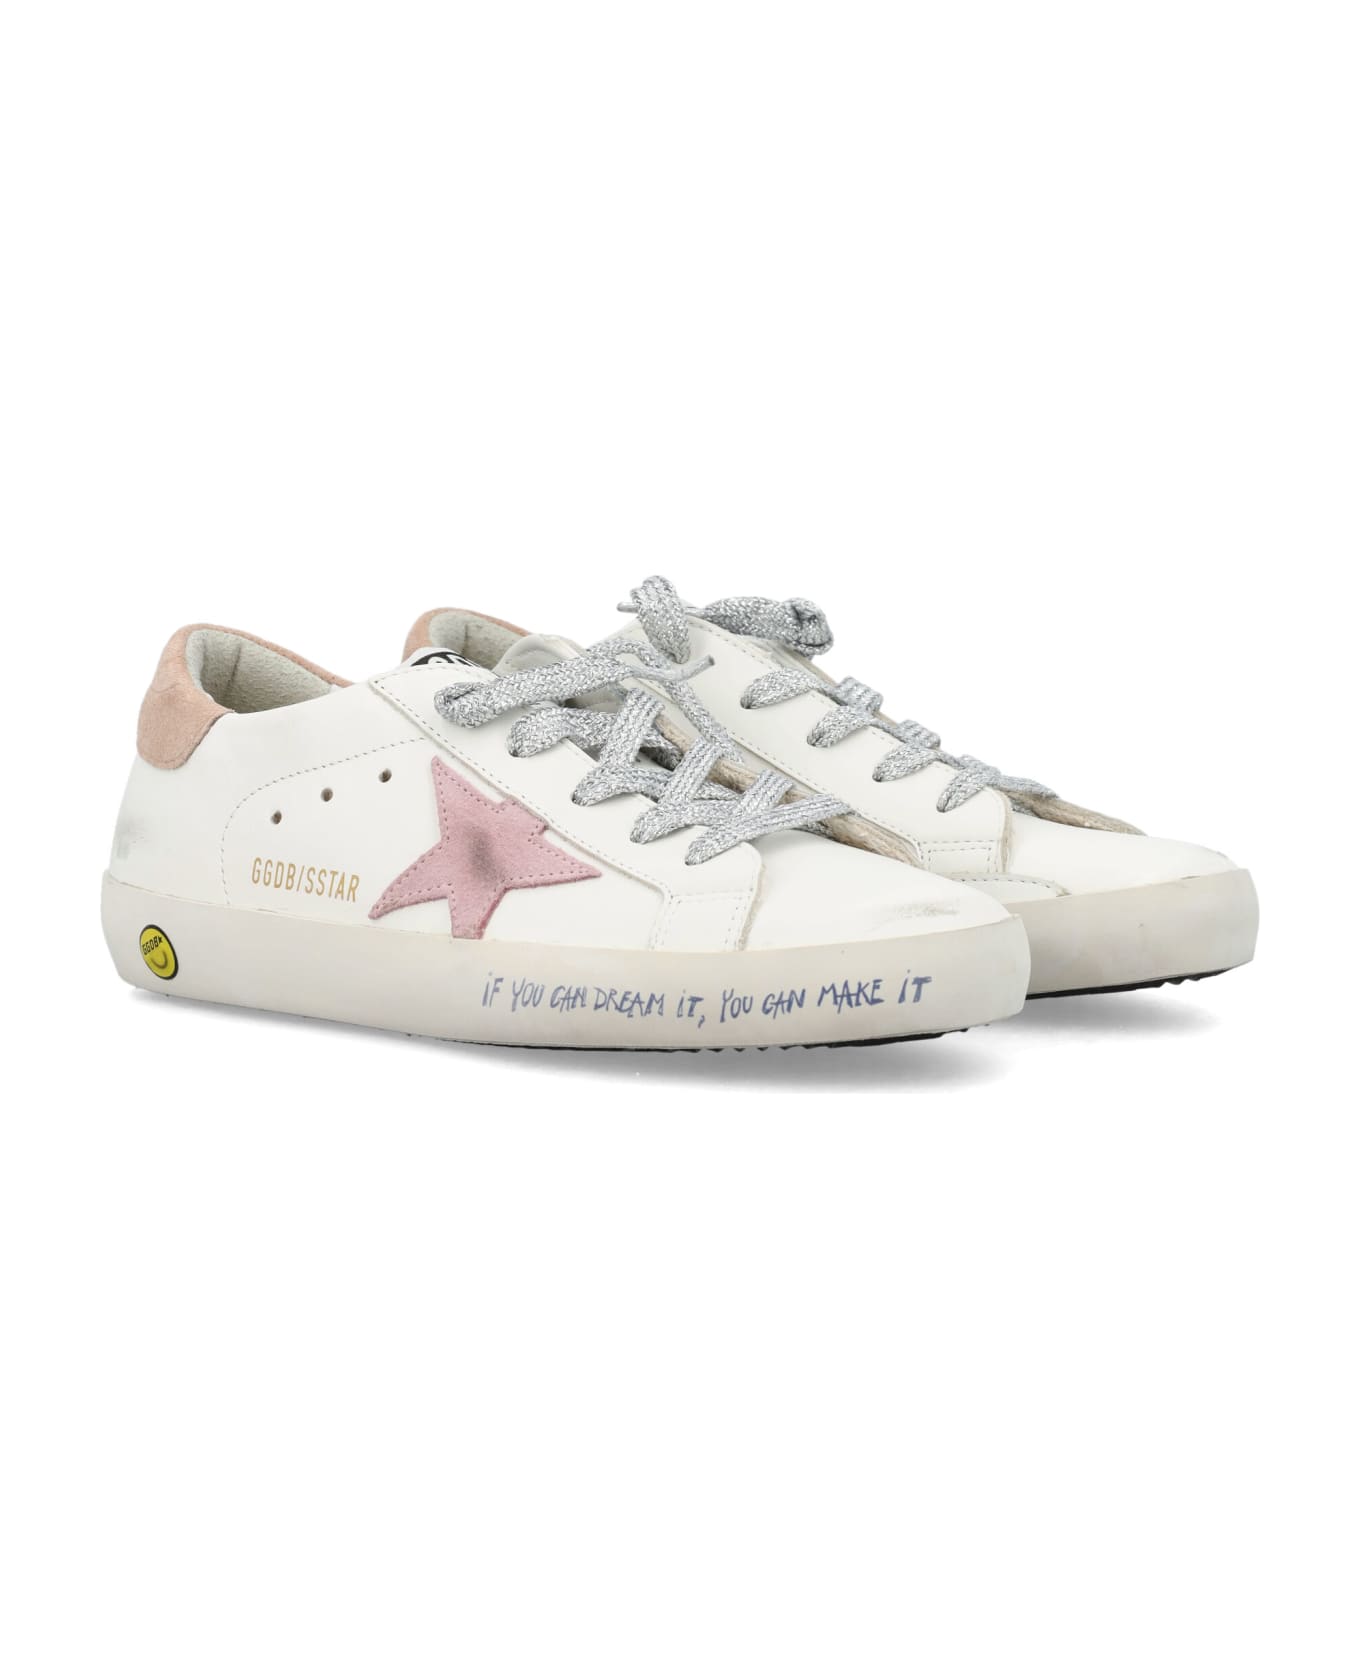 Golden Goose Super Star Sneakers - OPTIC WHITE/PINK